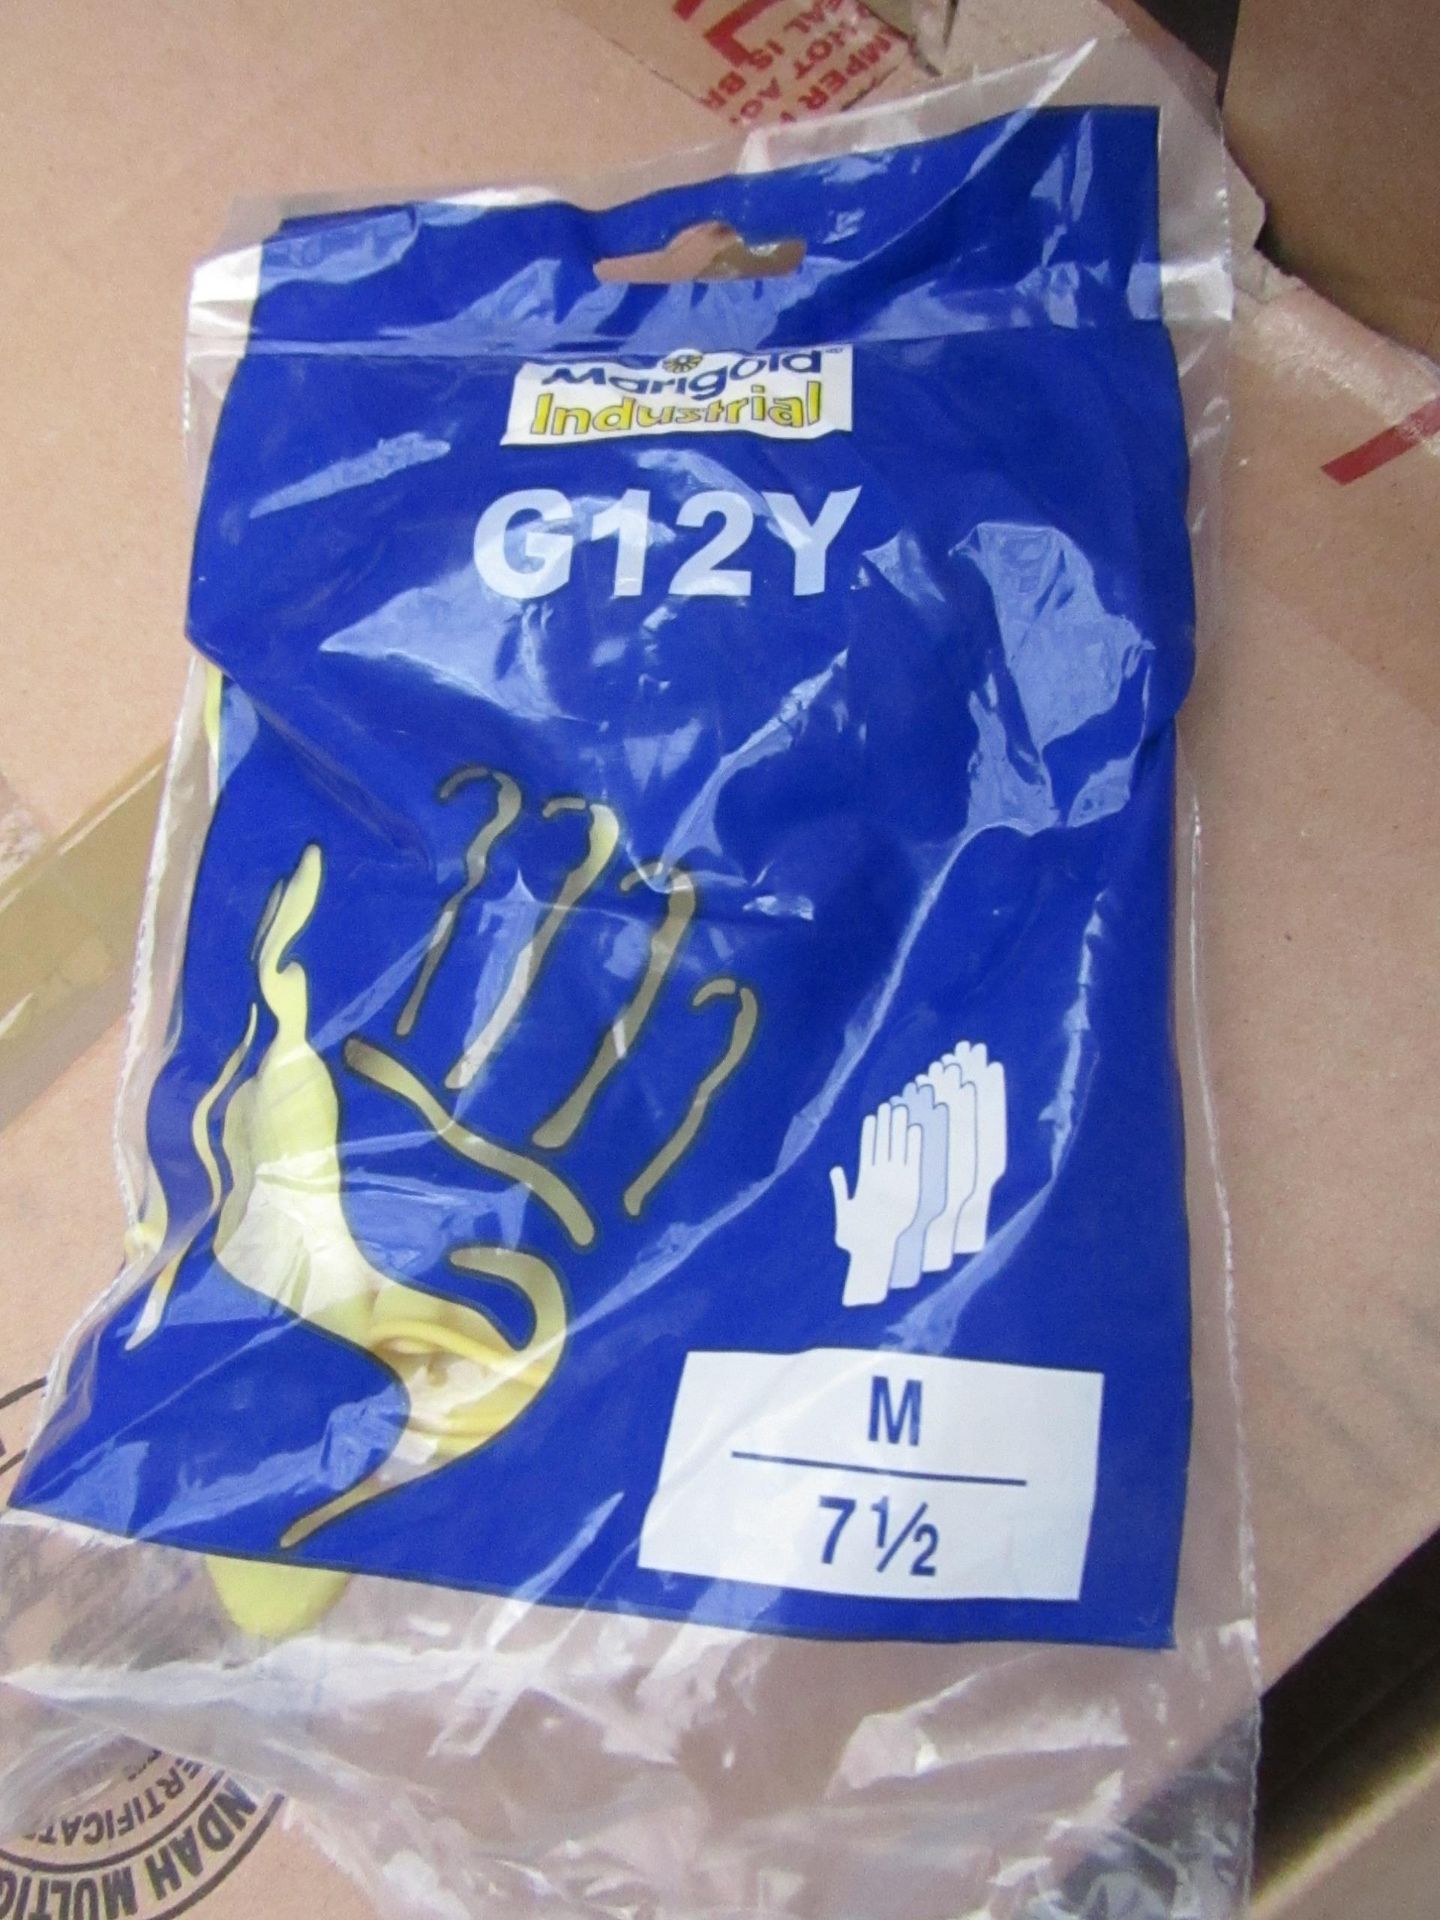 12x Pairs of Marigold industrial rubber gloves, new size Medium